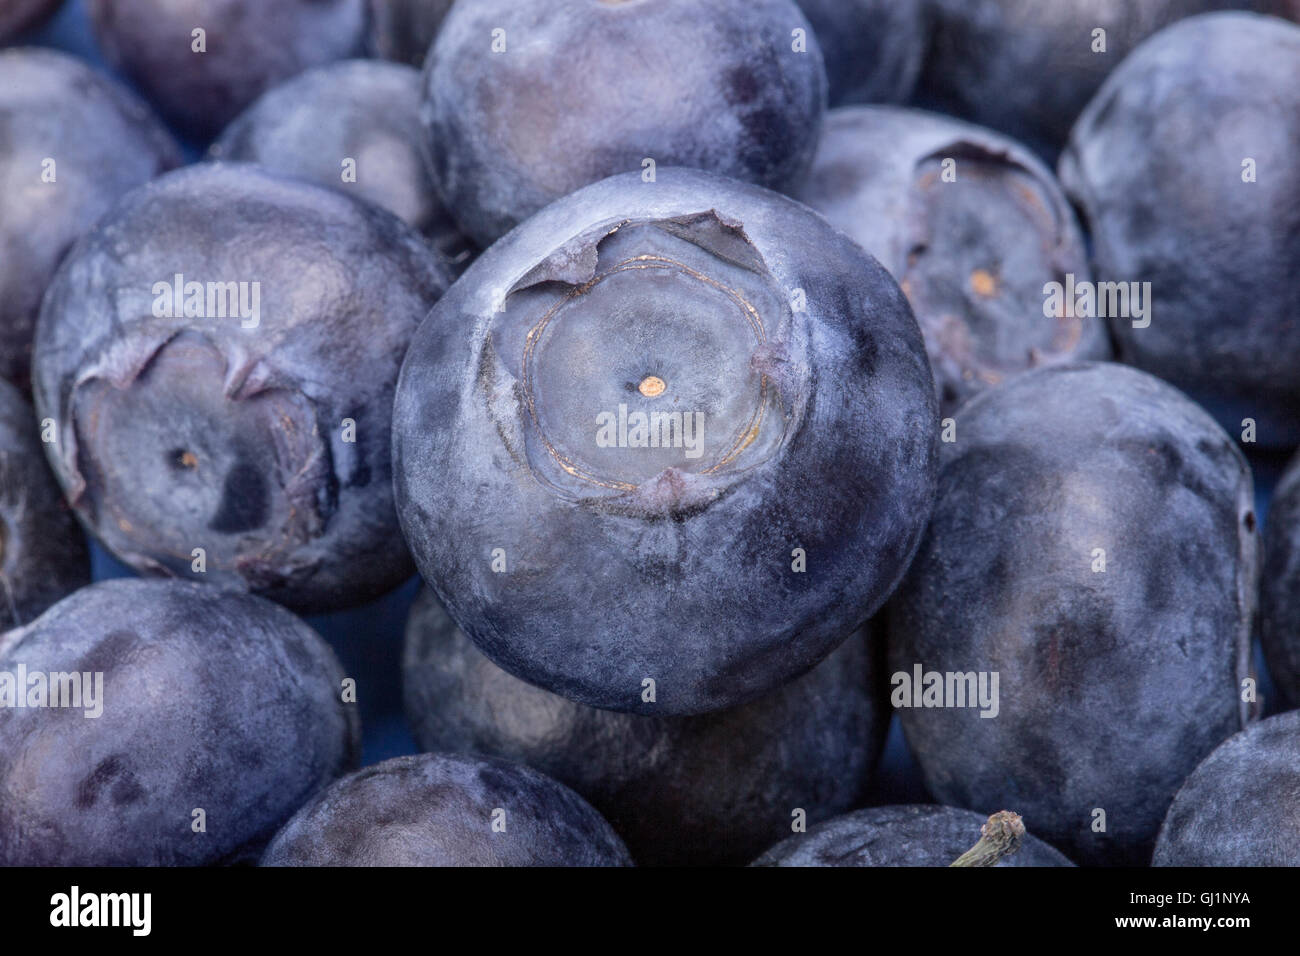 Ripe and Fresh Blueberries On A White Background Stock Photo